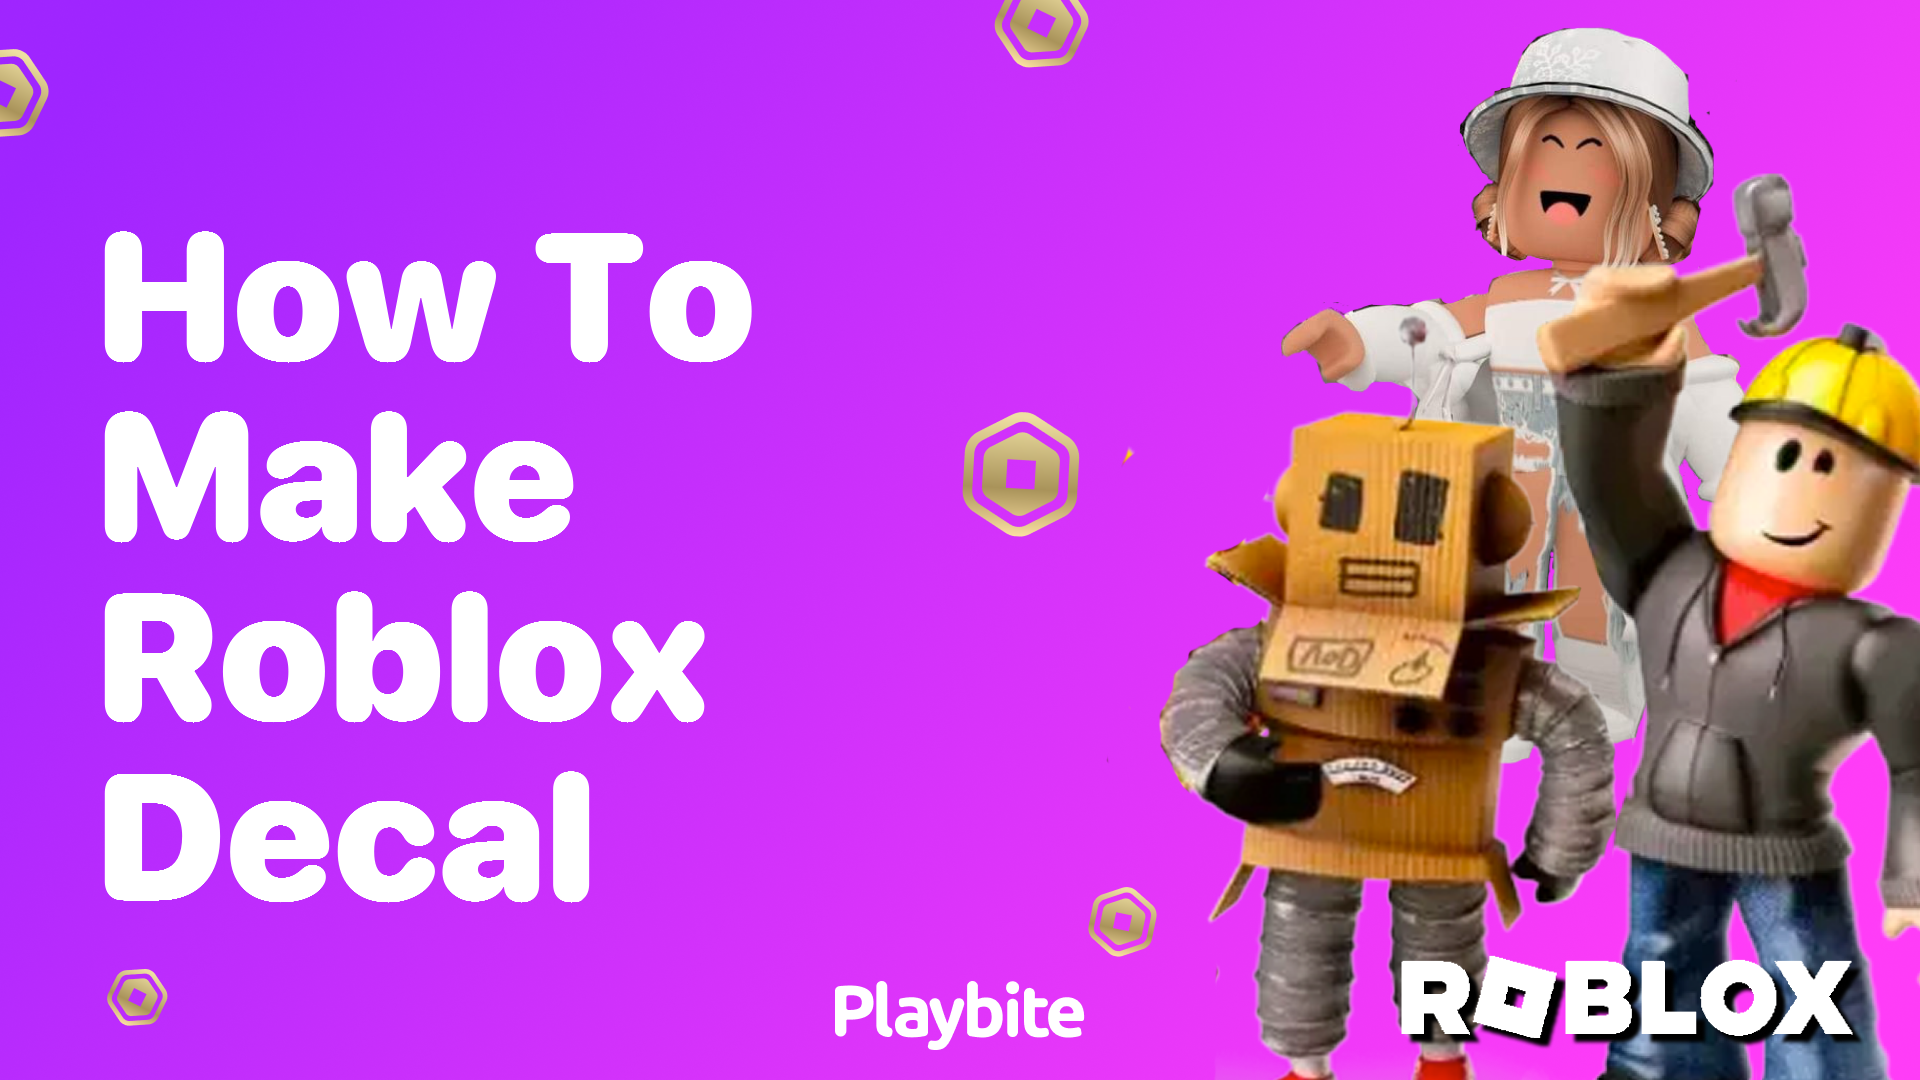 How to Make a Roblox Decal: A Simple Guide